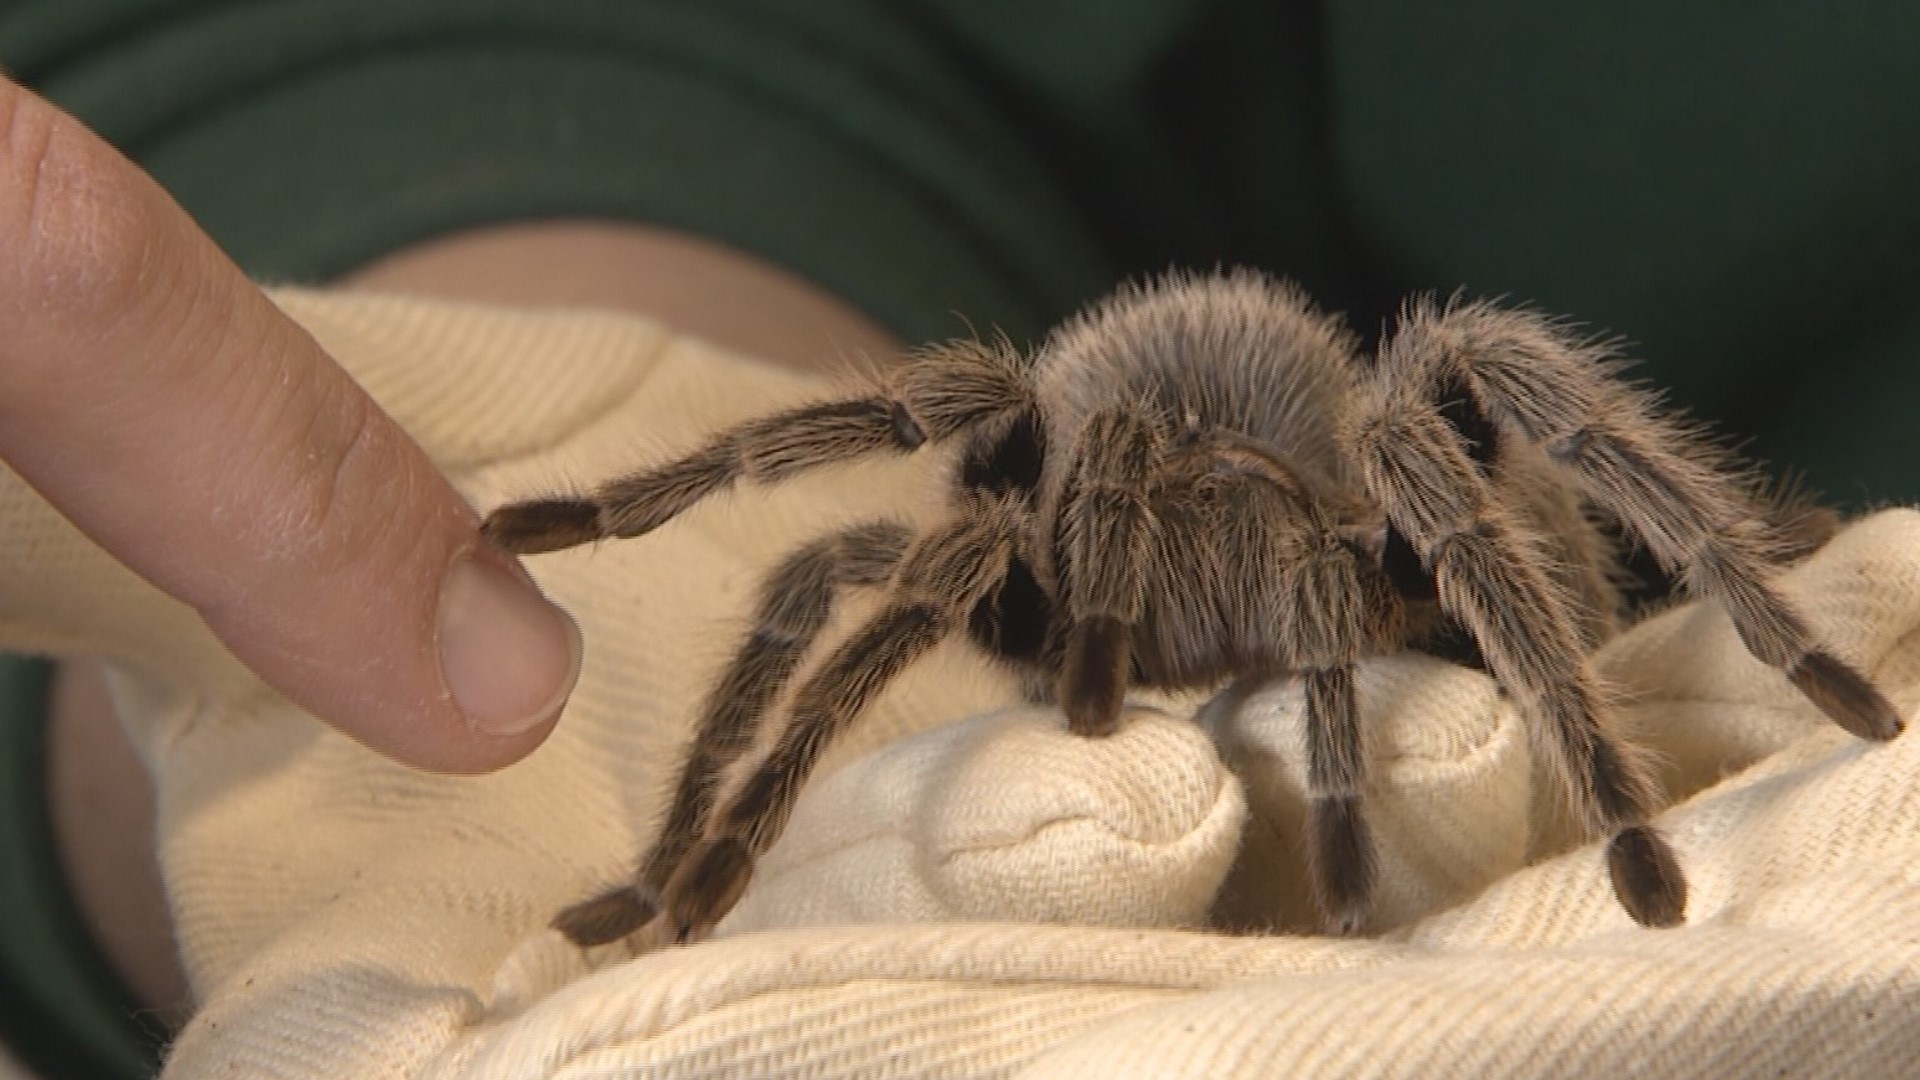 Woodland Park Zoo's Erin Sullivan debunks five spider myths just in time for Halloween